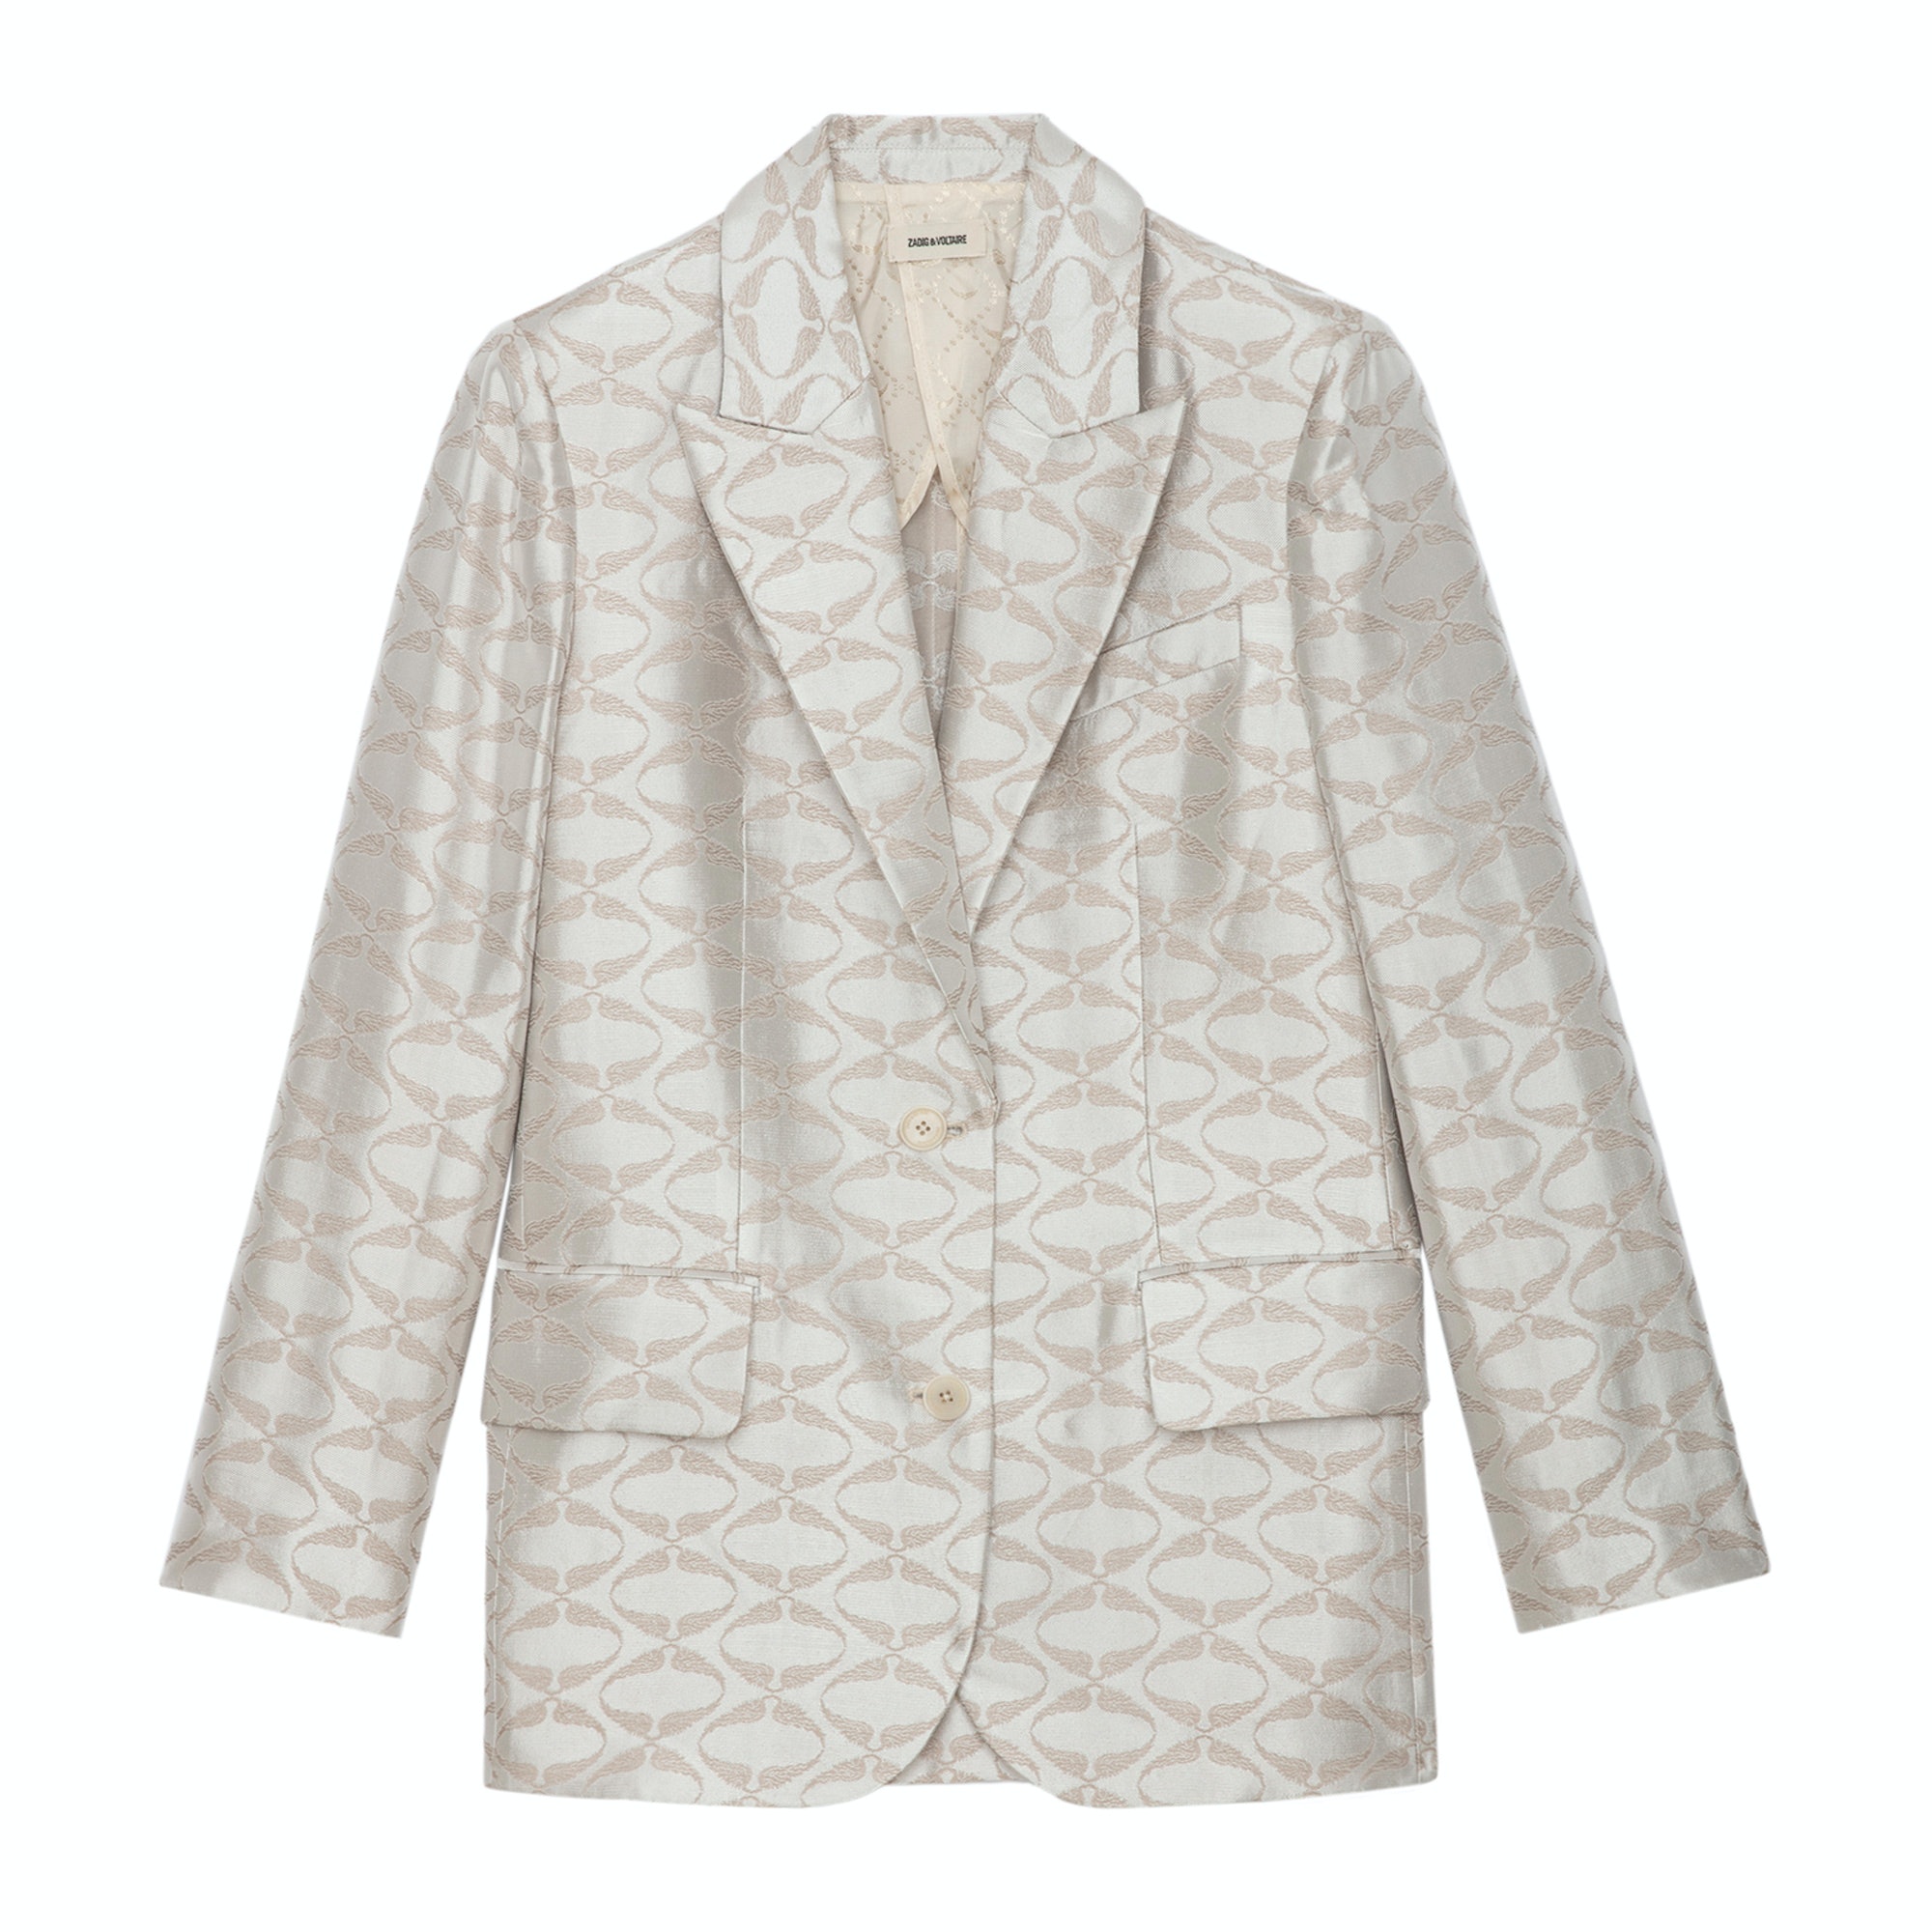 Blazer Vicka Wings Jacquard Scout - Taille 40 - Femme